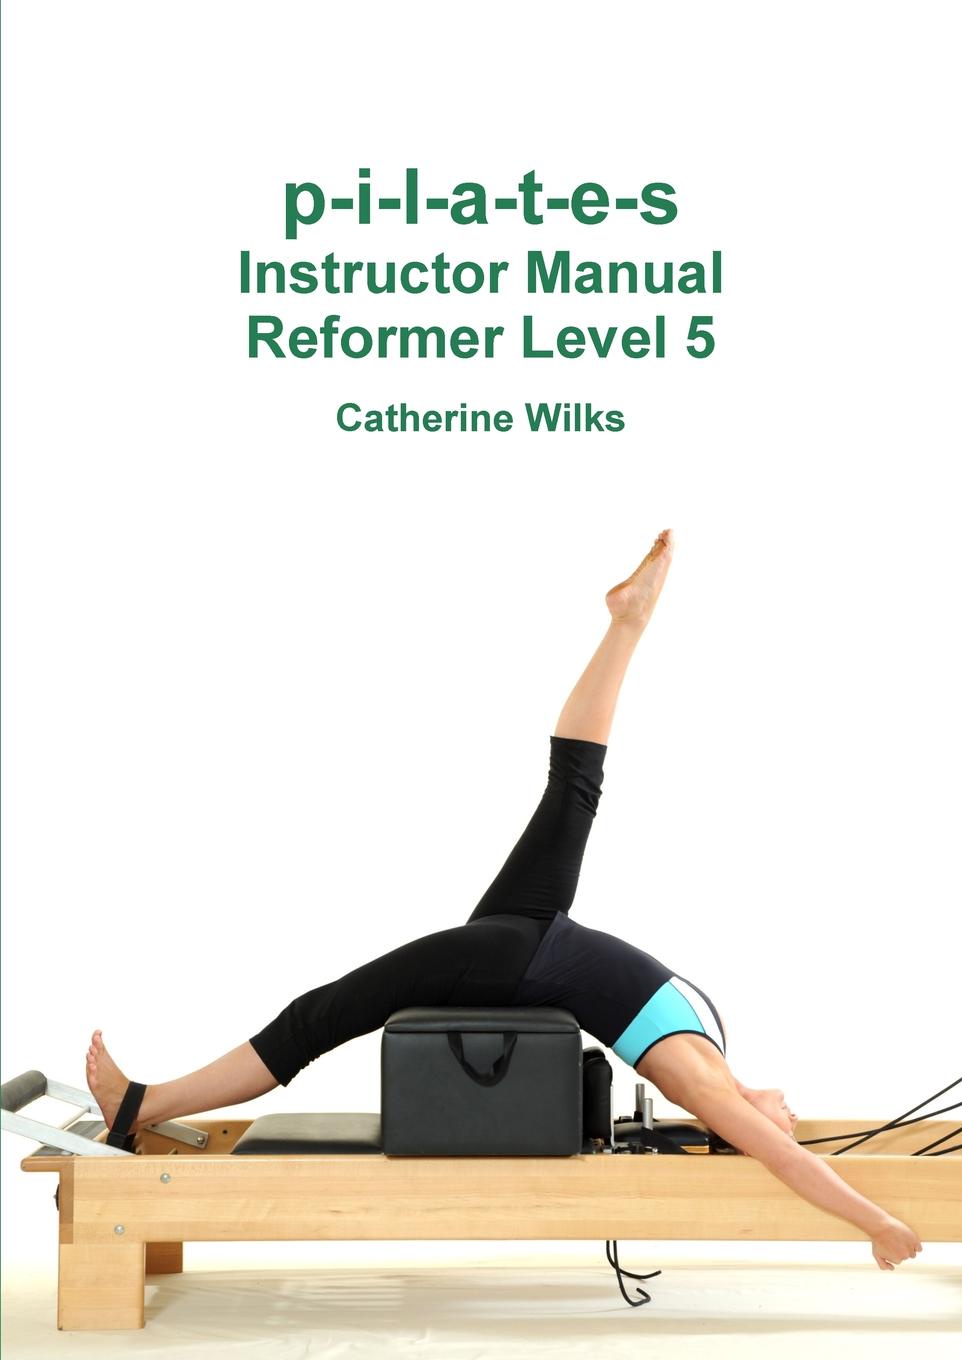 Catherine Wilks p-i-l-a-t-e-s Instructor Manual Reformer Level 5